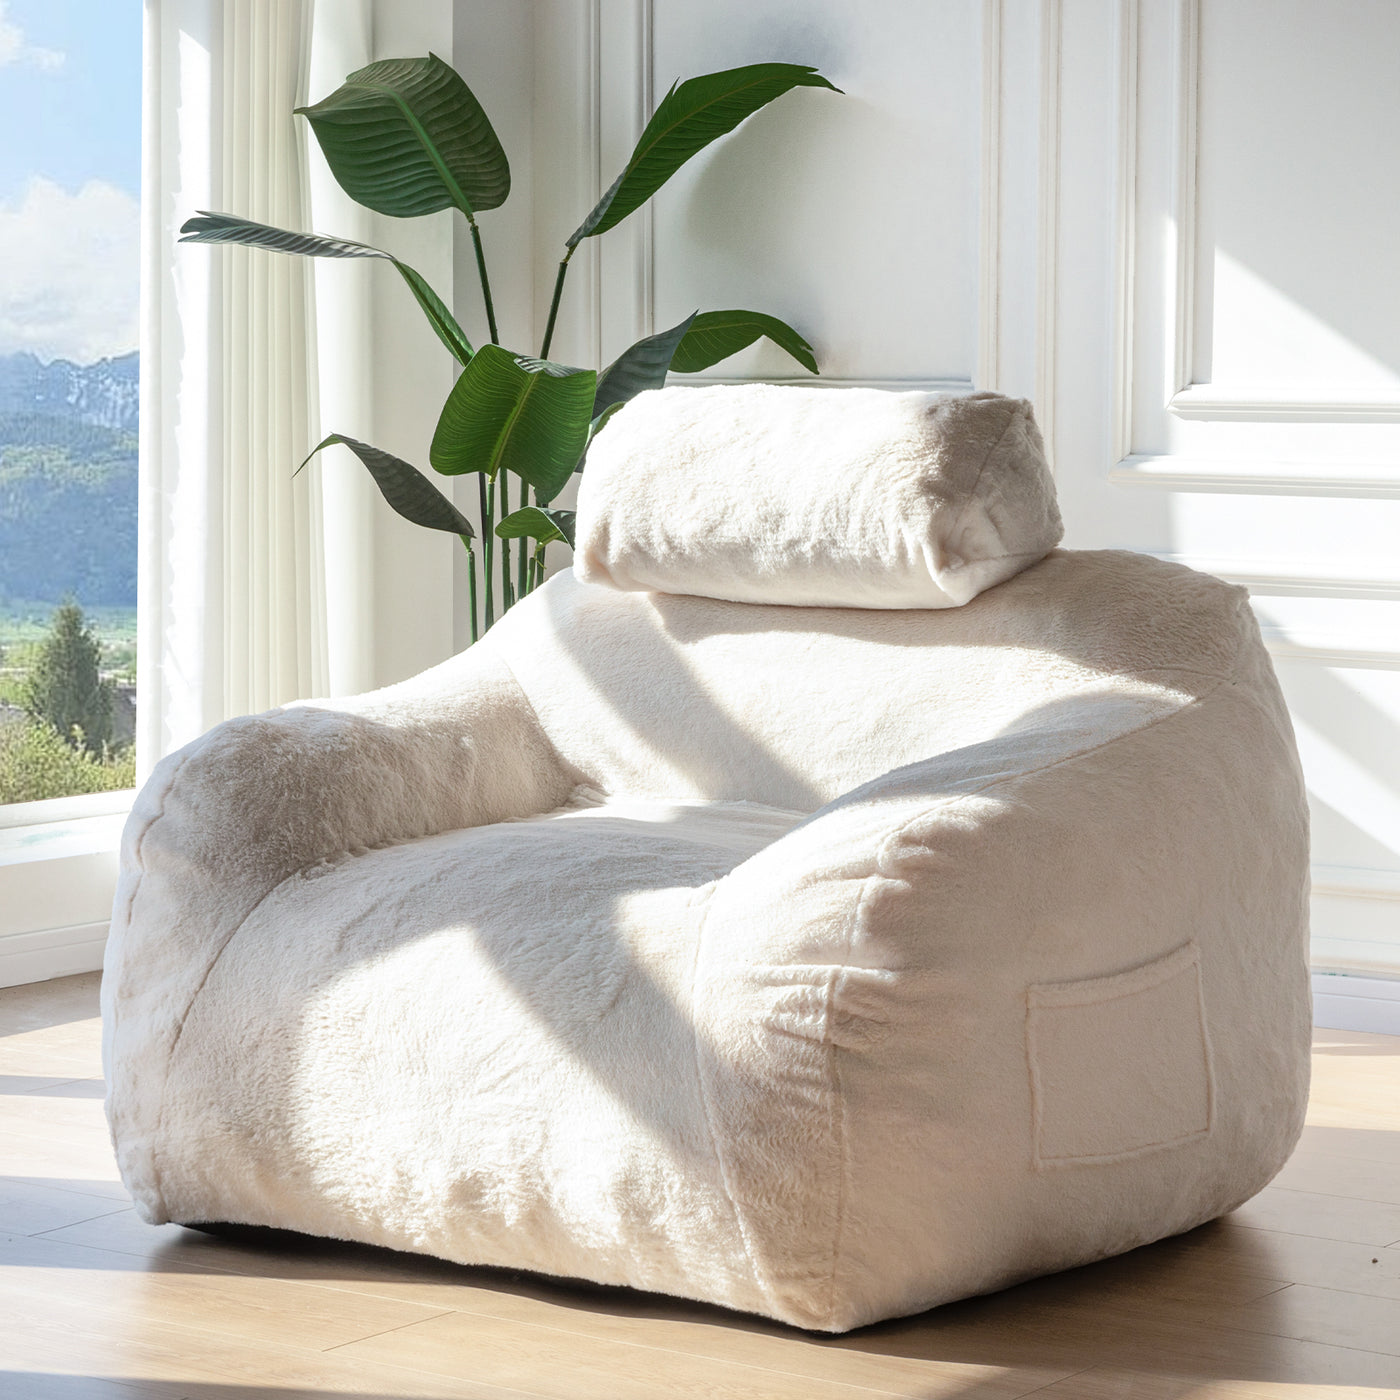 MAXYOYO Giant Bean Bag Chair with Pillow, Faux Fur Fabric Fluffy Large Bean Bag Chair Couch for Reading and Gaming, Beige